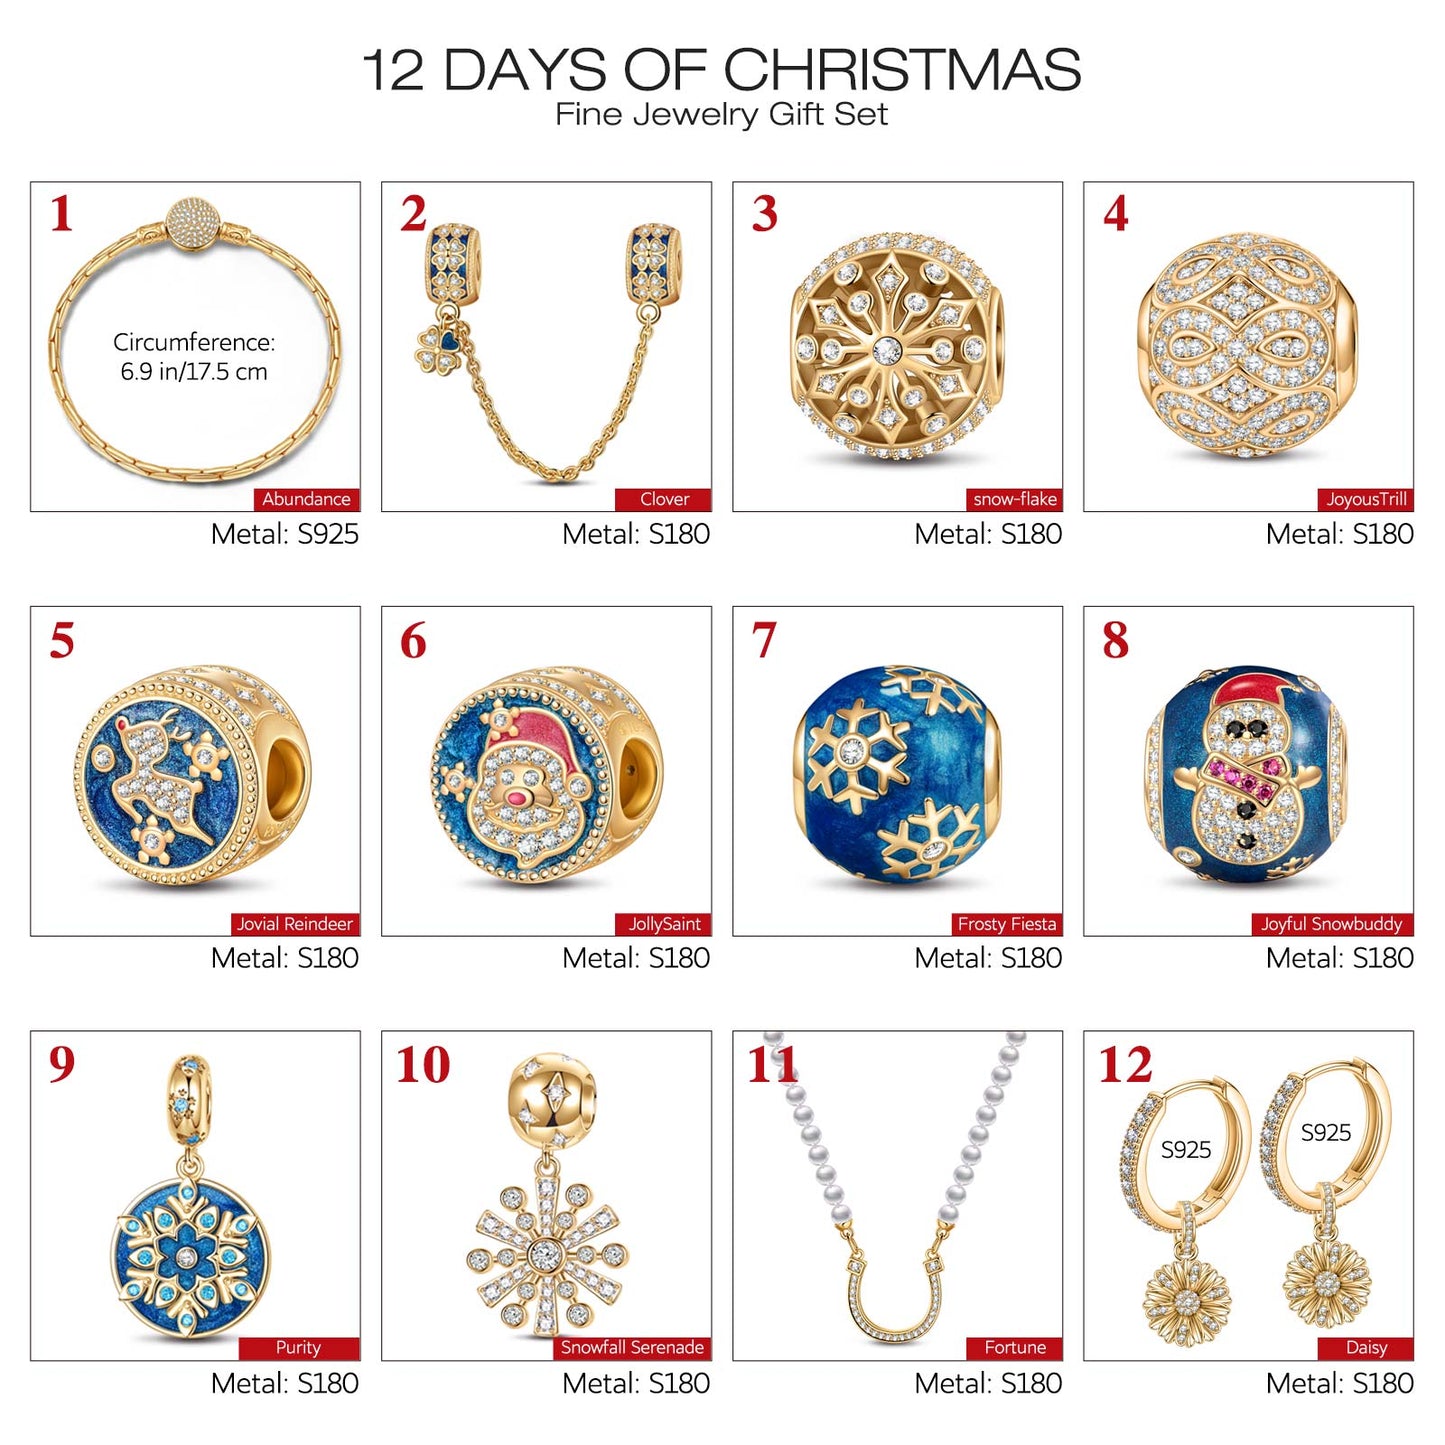 The Iconic Advent Calendar - 12 Days of Christmas Fine Jewelry Gift Set: Sterling Silver Ice Blue Earrings and Charms Bracelet Set With Enamel and Necklace In 14K Gold Plated